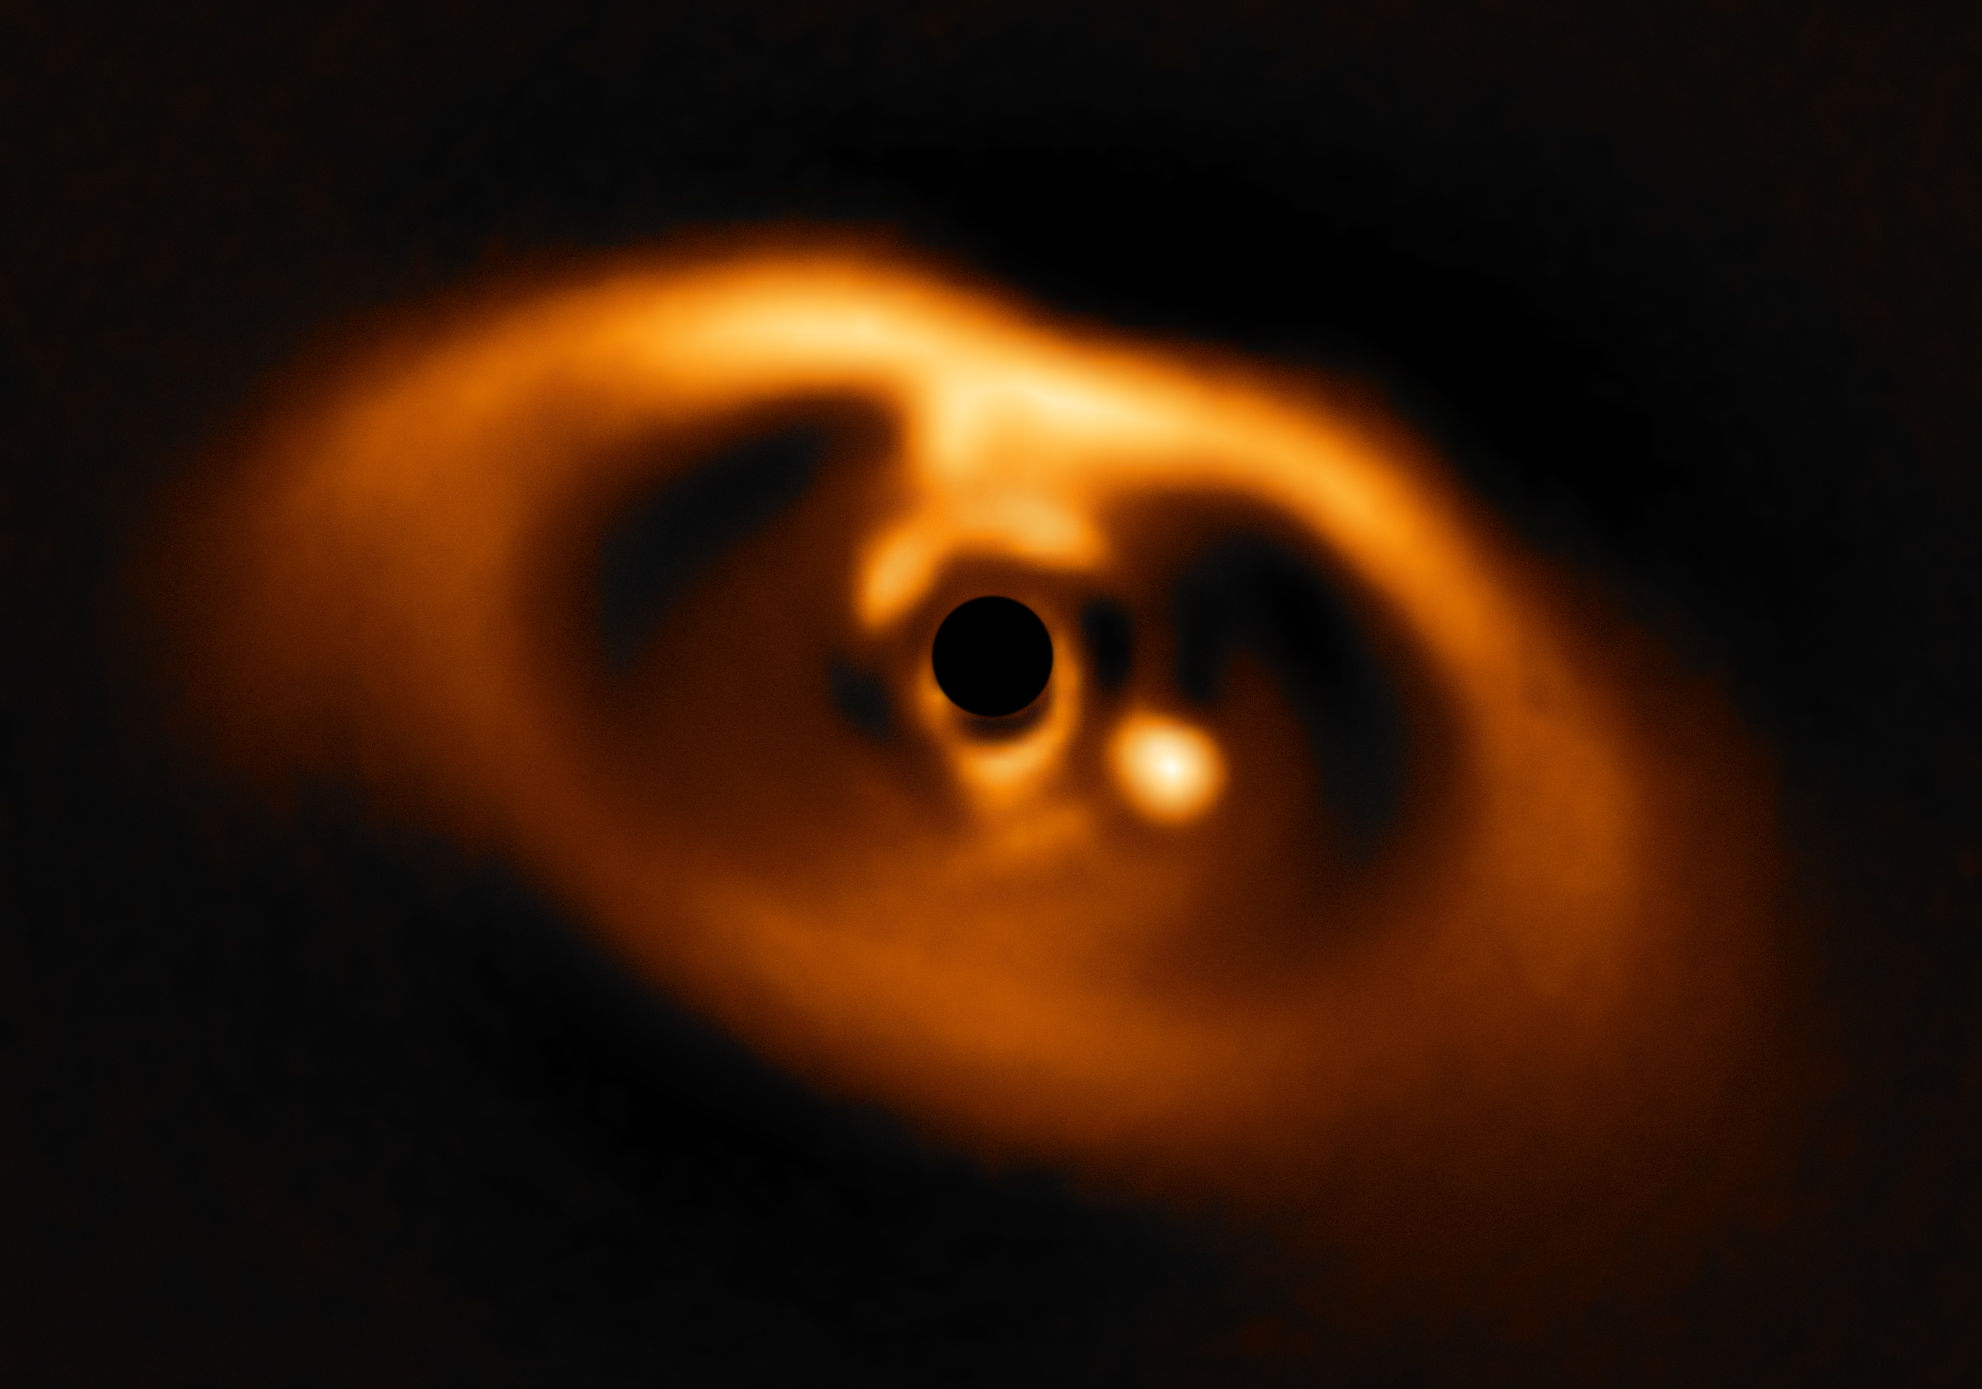 Image of the disk around the star PDS 70 (masked out to reduce brightness), showing the planet PDS 70b (bright spot to lower right). Credit: ESO/A. Müller et al.